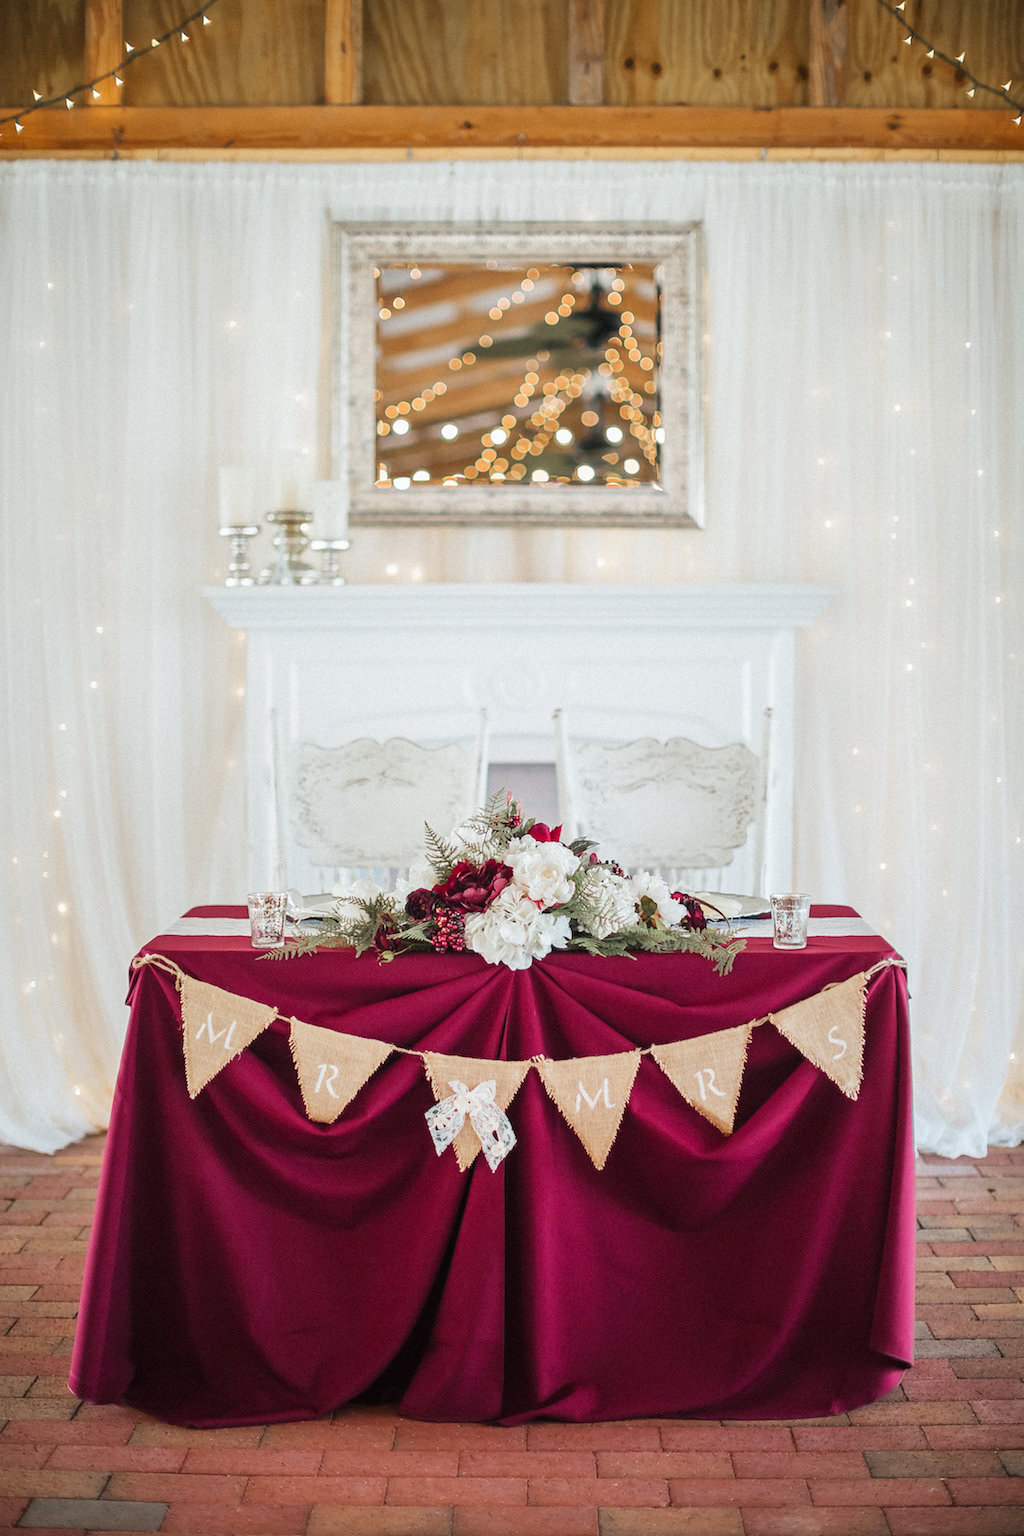 Rustic Barn Wedding Bride and Groom Sweetheart Table with Burlap Pennant Sign, Burgundy Tablecloth, White Lace Draping and String Lights, and Low Cream and Marsala with Greenery Centerpiece